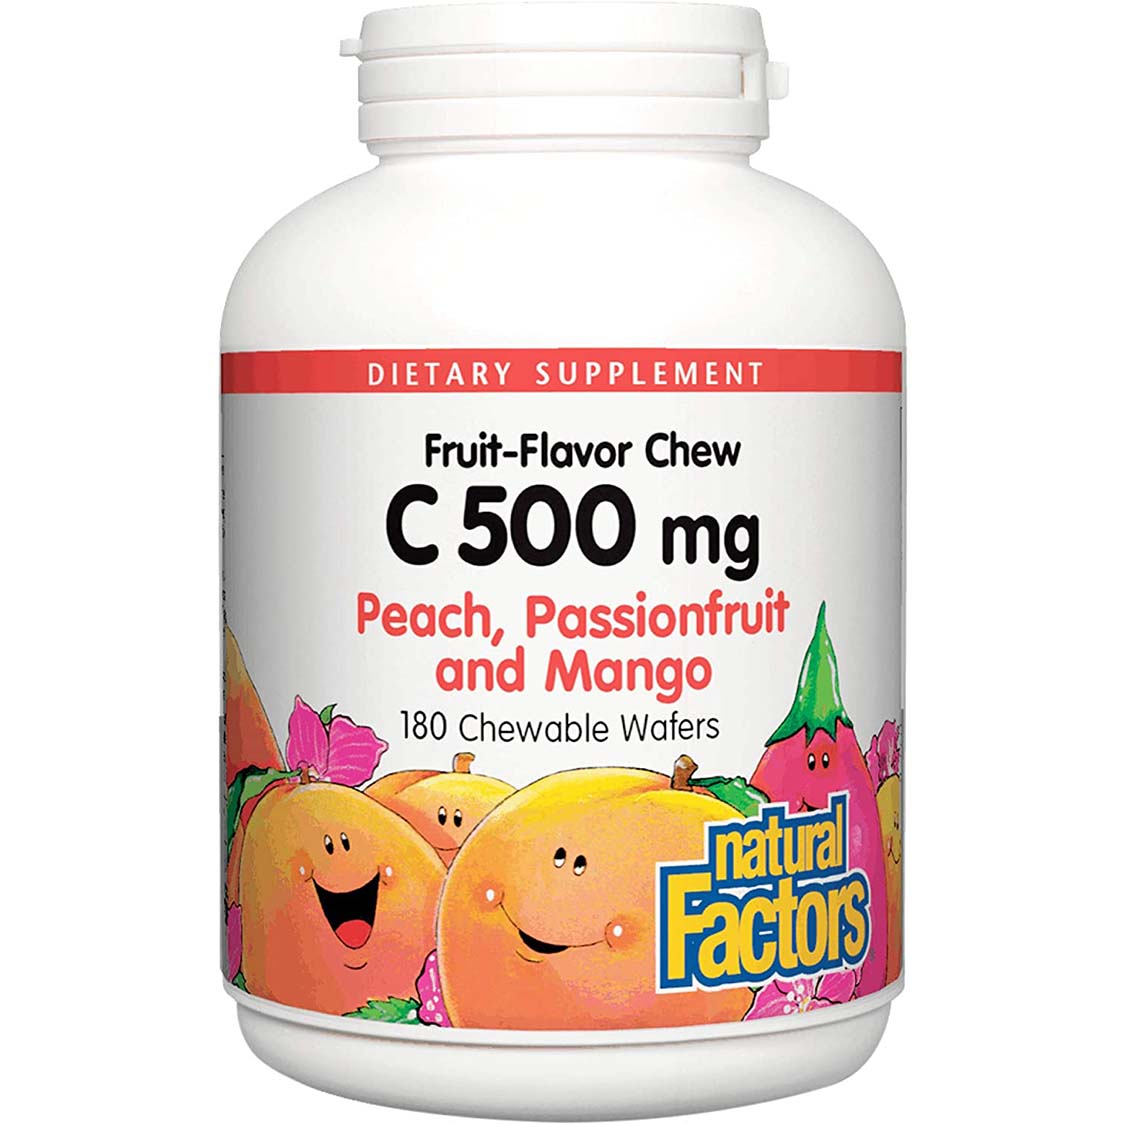 Natural Factors Vitamin C 500 mg Chewable Wafer 180 Chewable Wafer Peach Passionfruit Mango